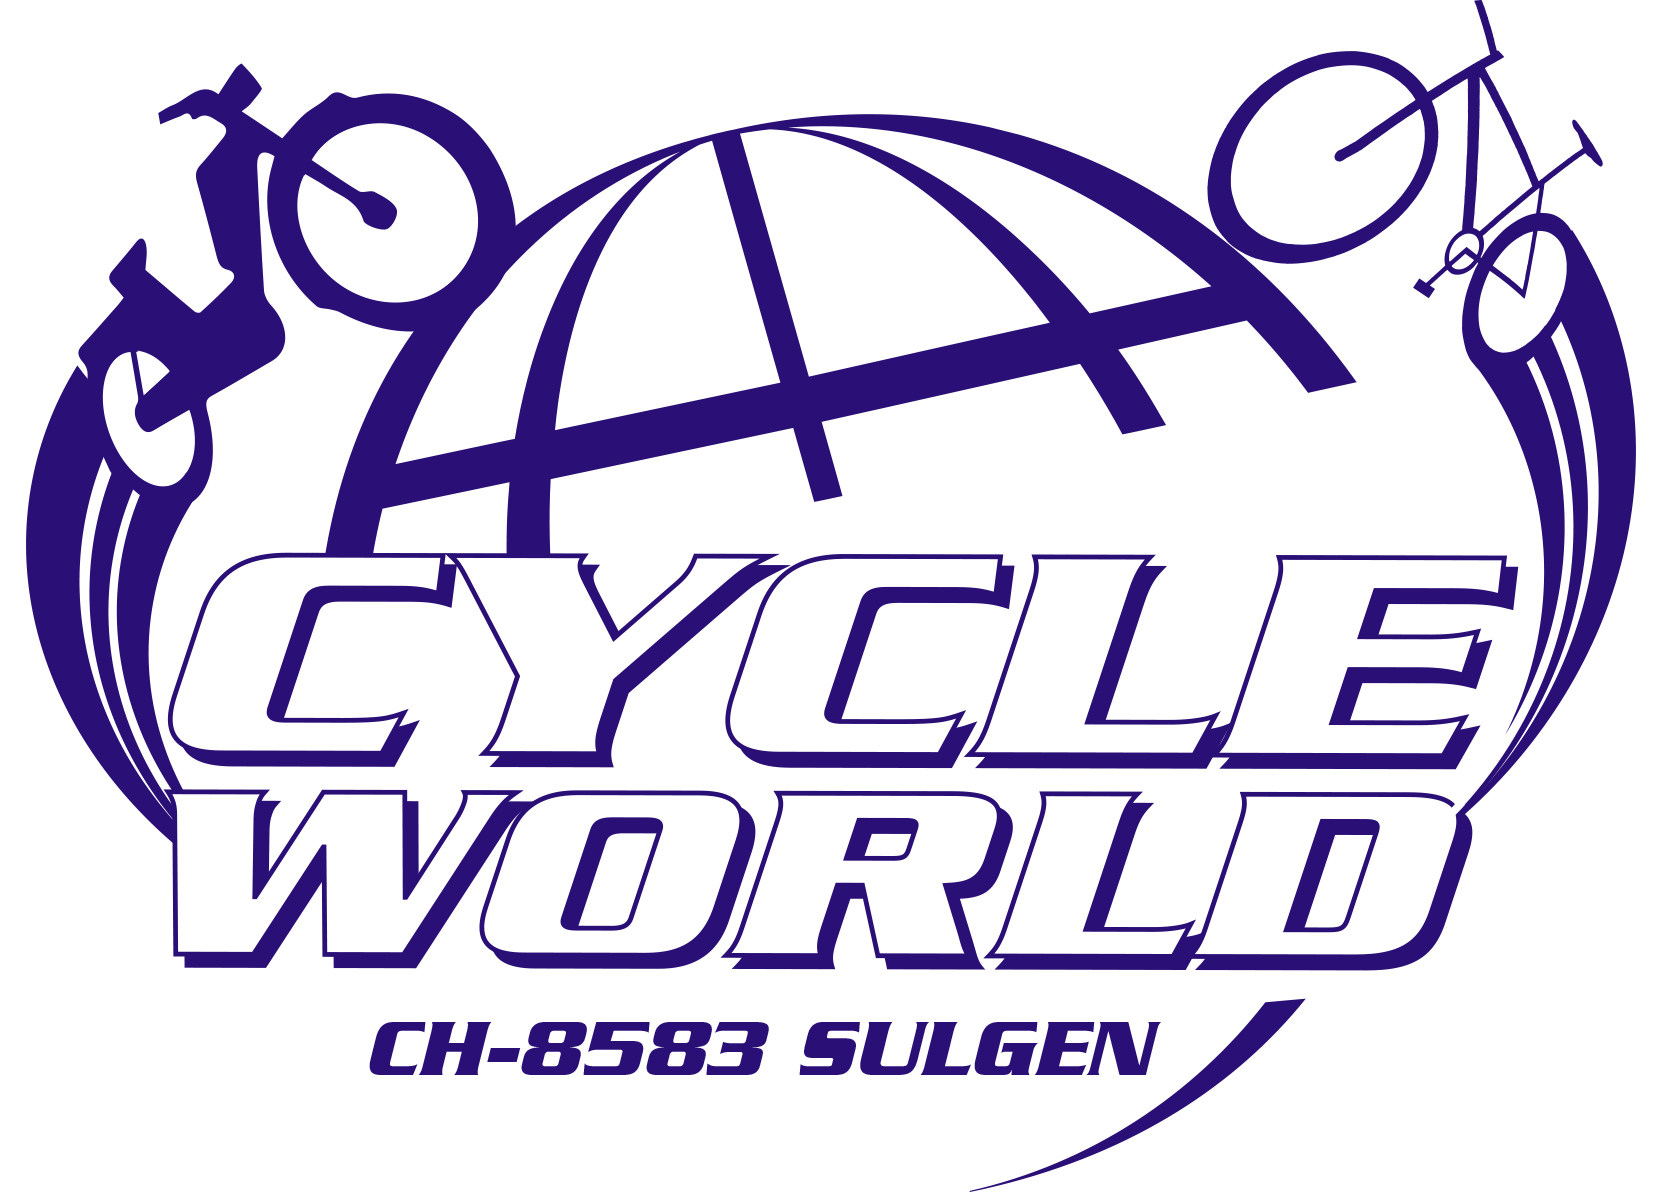 (c) Cycleworld.ch